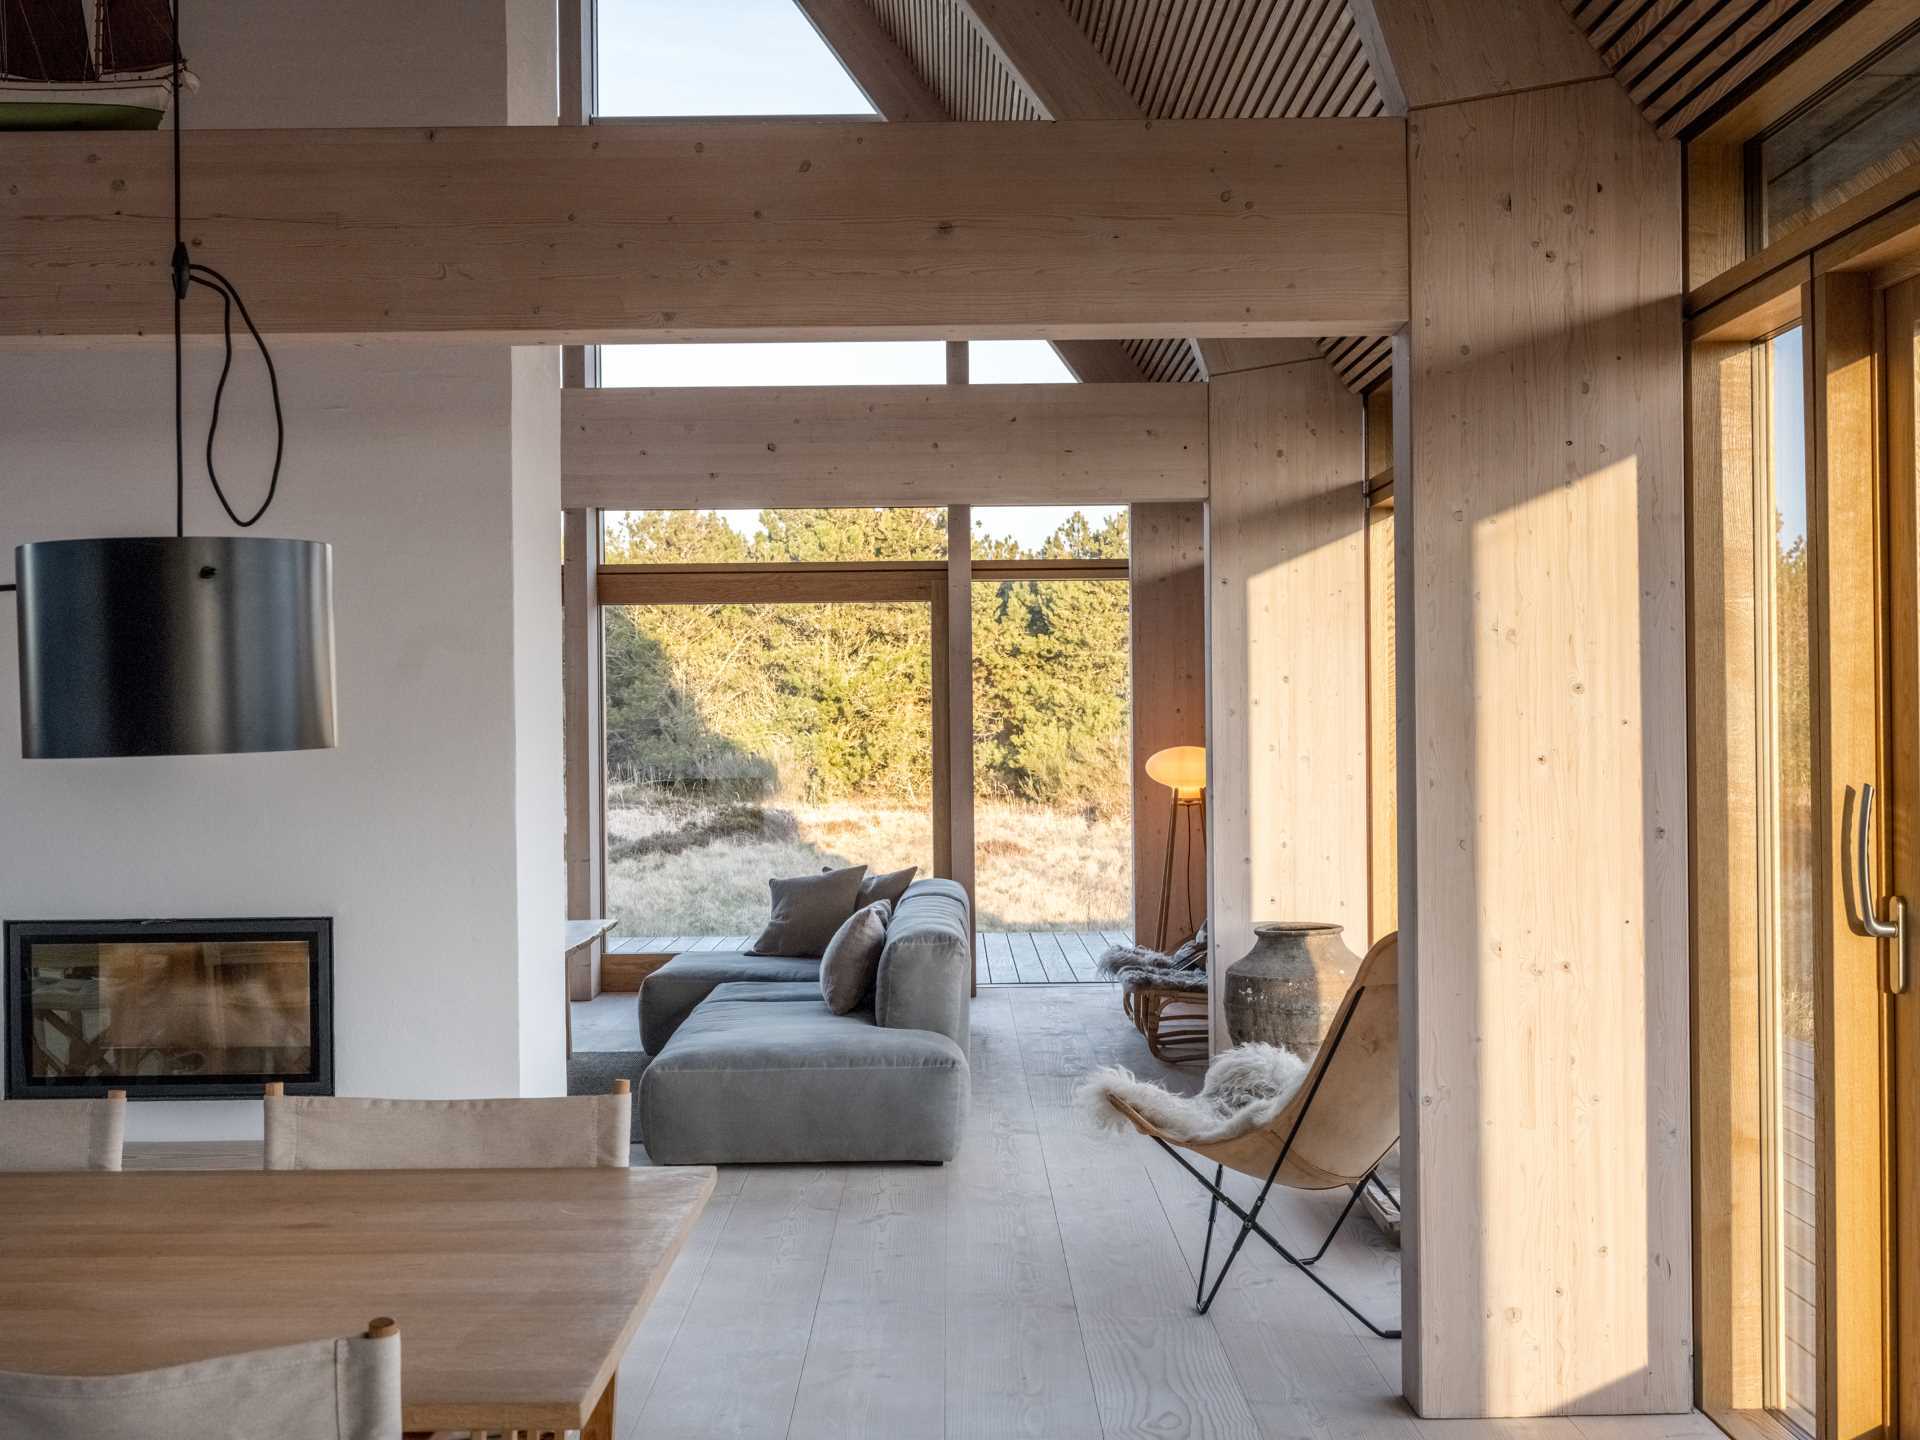 A light and natural color palette can be seen throughout this modern house, with a fireplace able to be enjoyed from both sides.